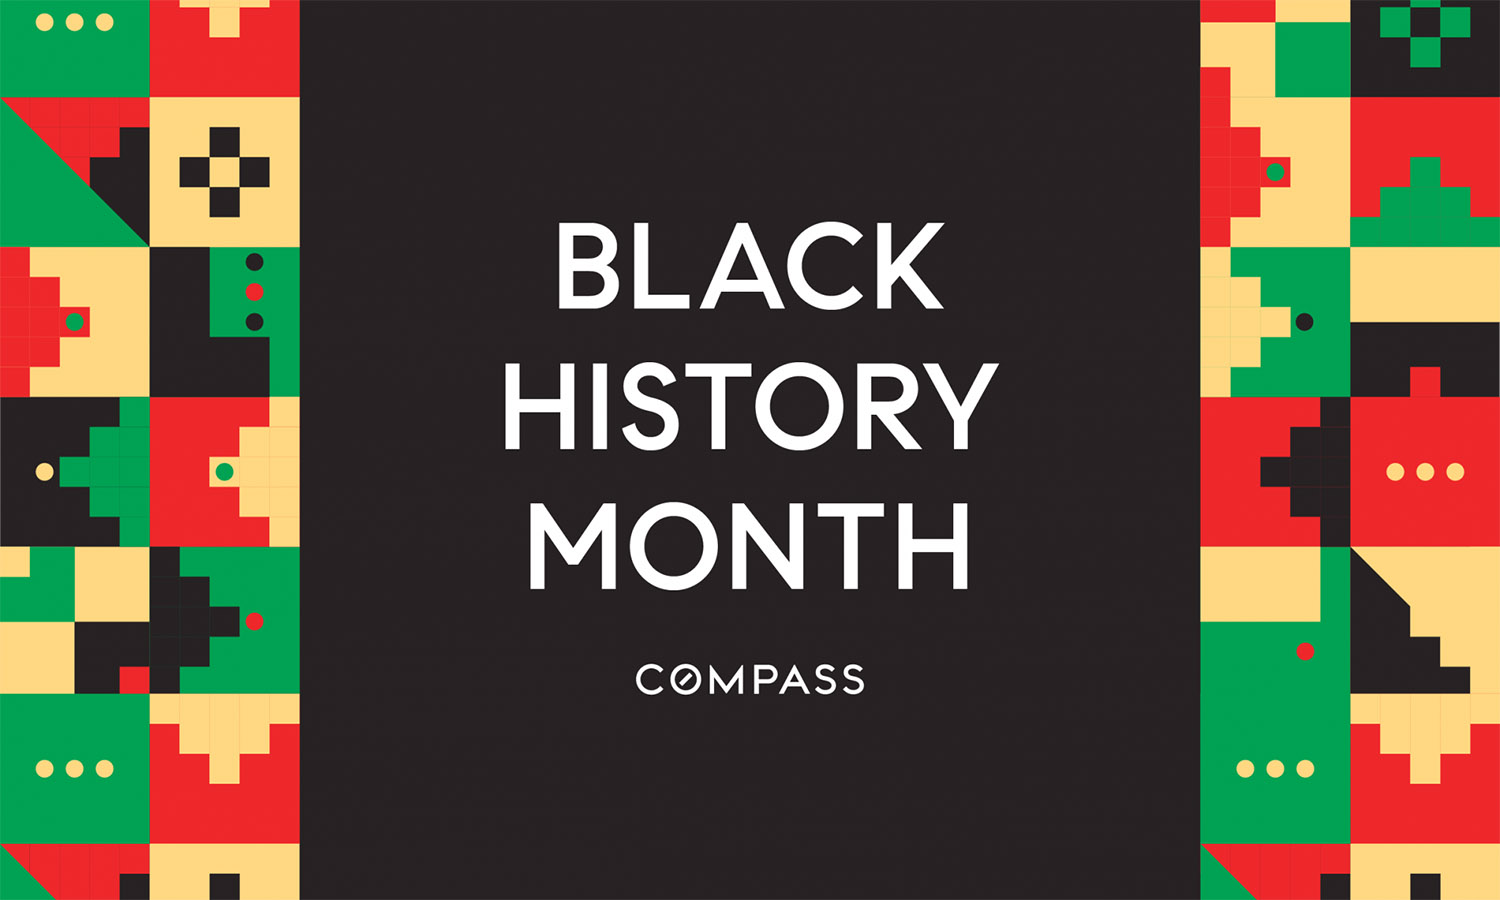 Black History Month Banner with red, green, yellow cubicle border